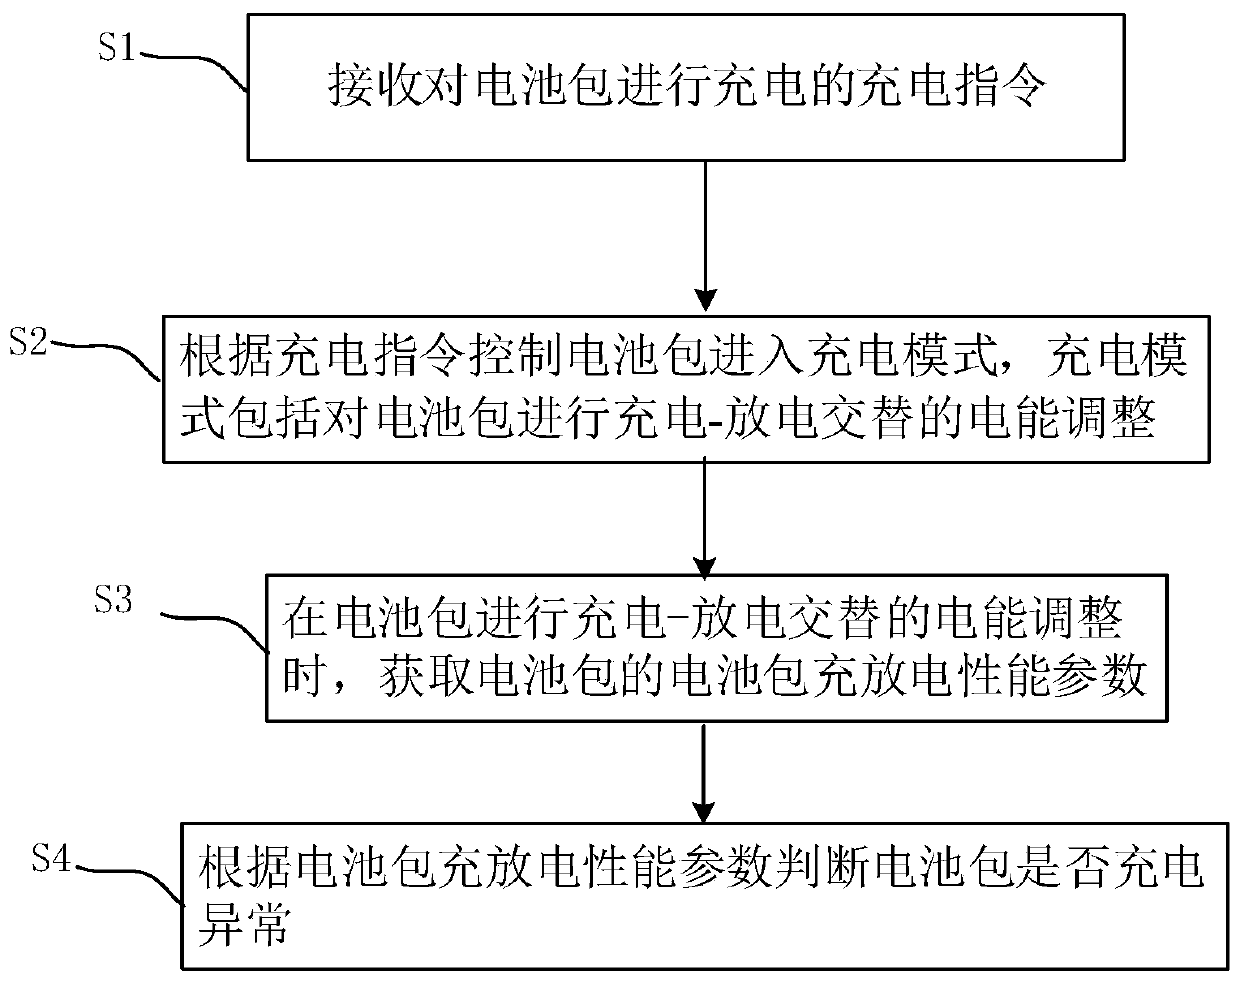 Charging and discharging detection system control method and device, and storage medium